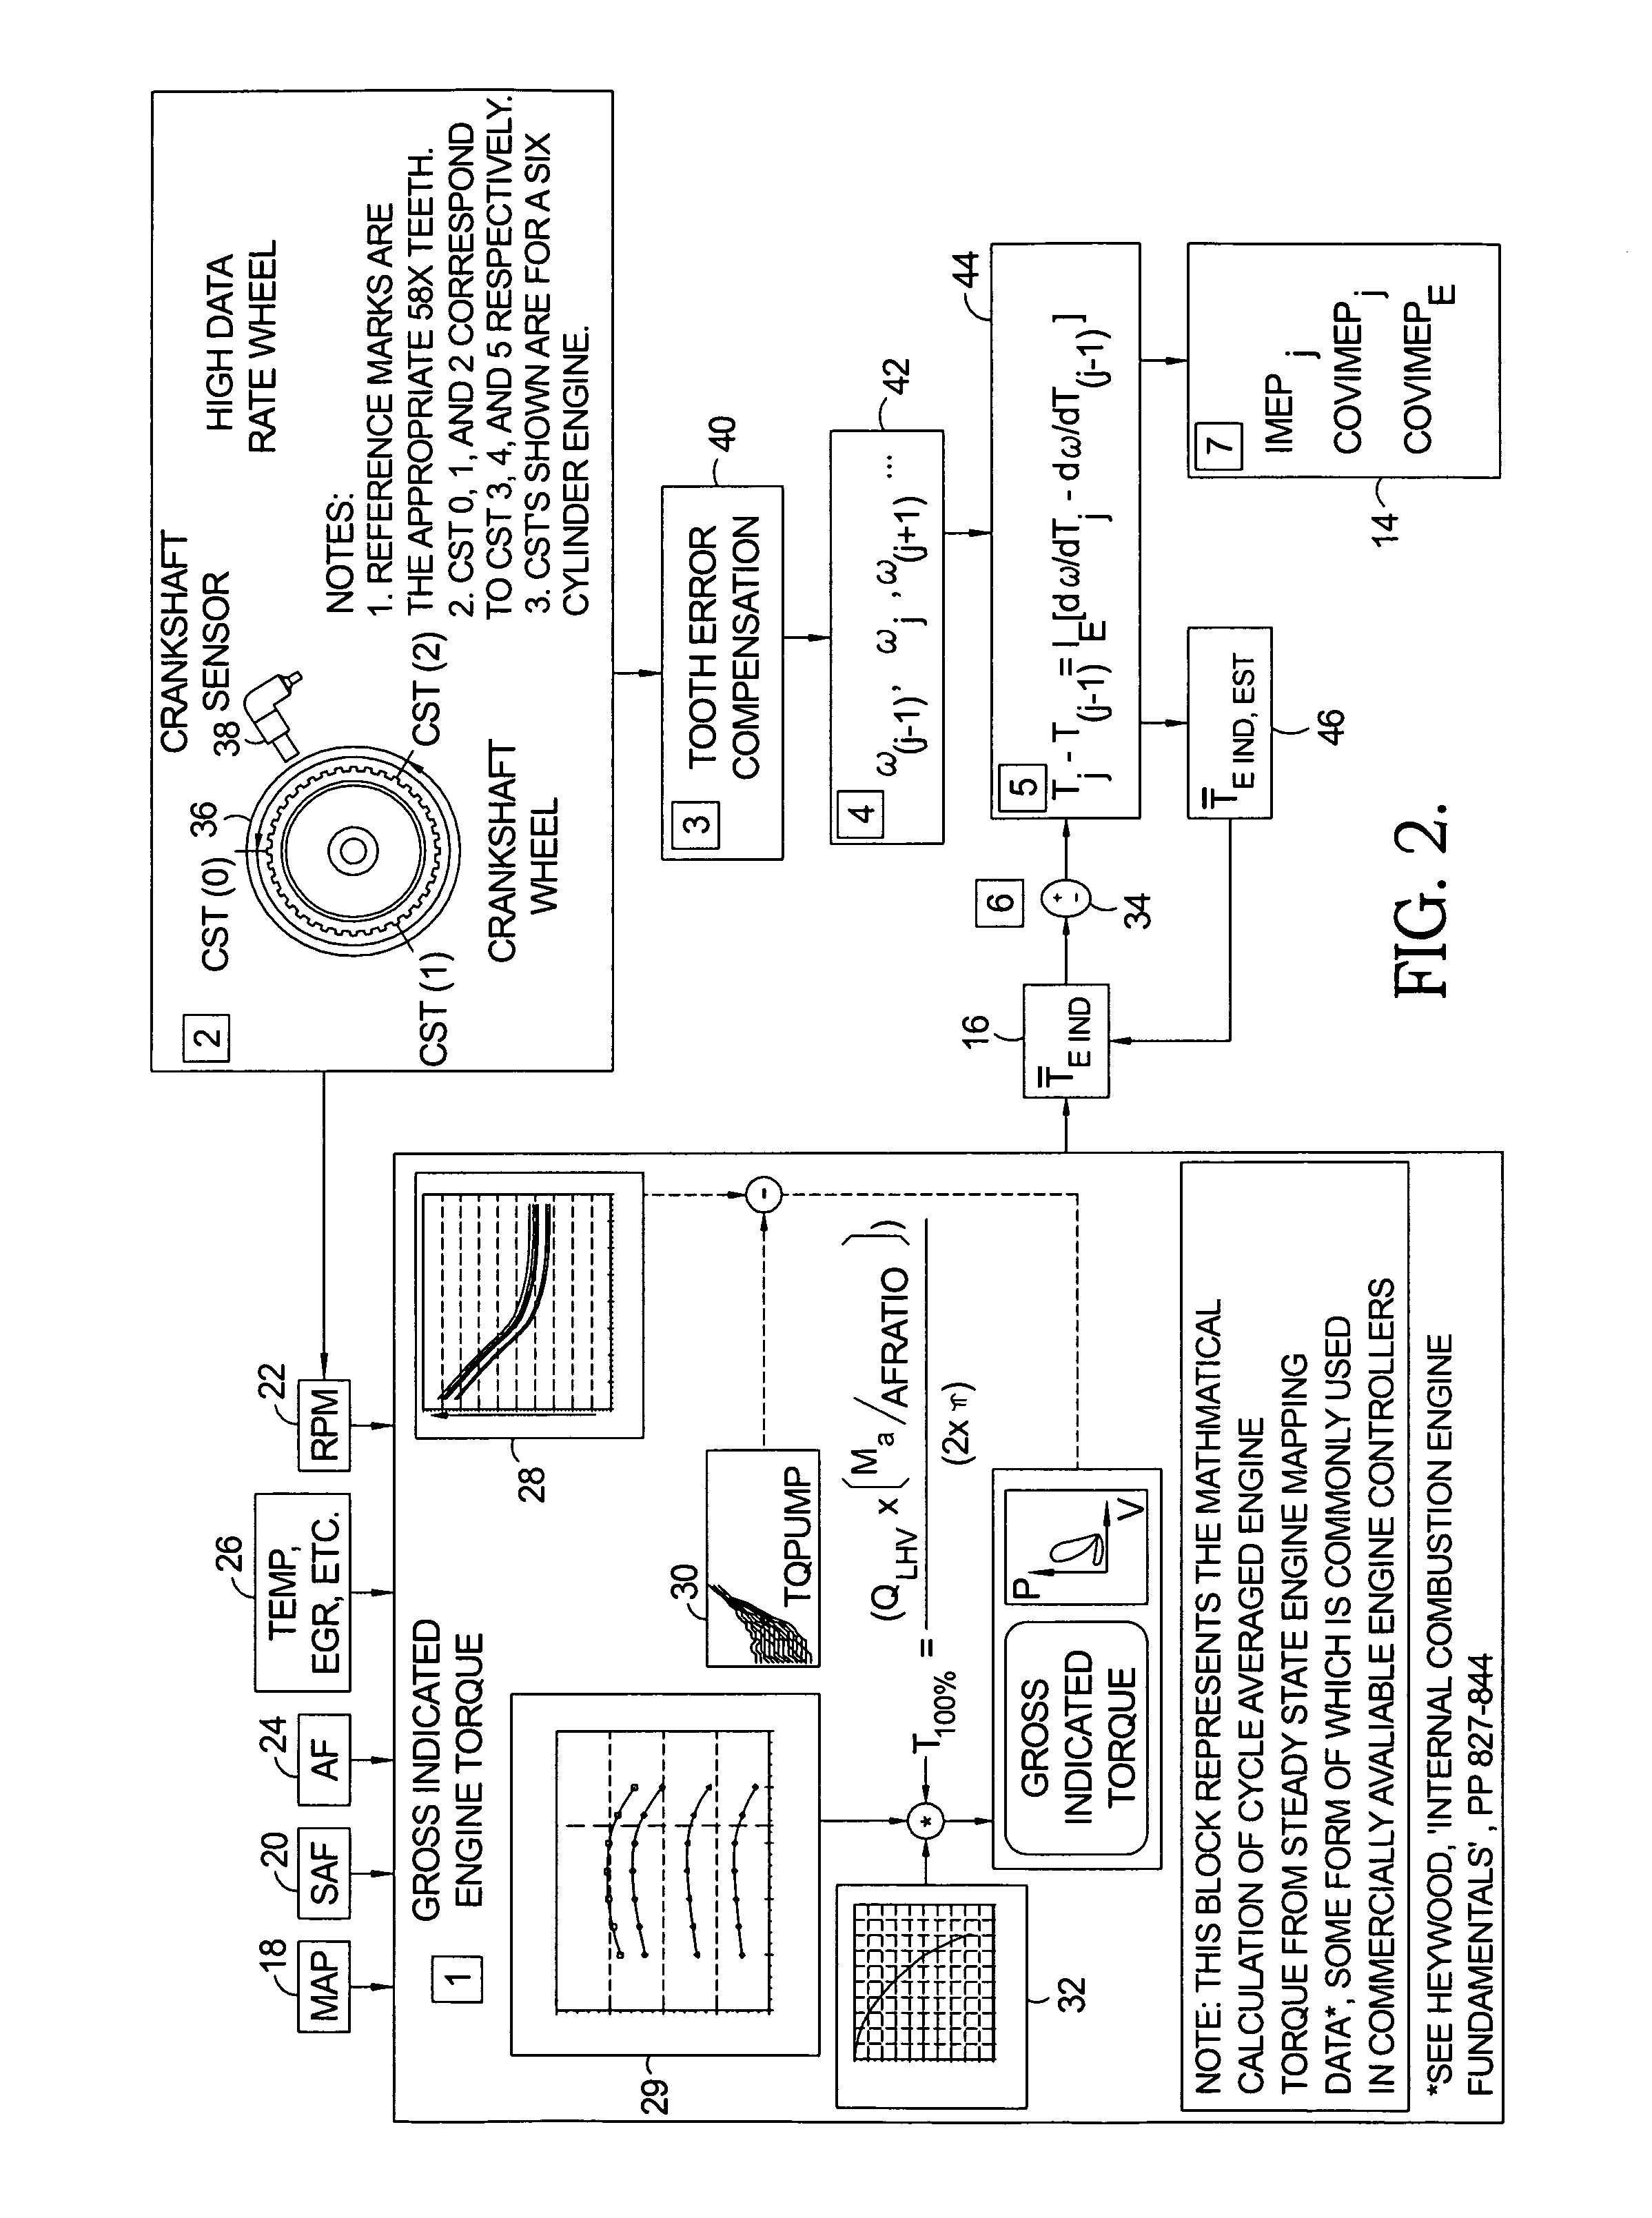 Method for estimation of indicated mean effective pressure for individual cylinders from crankshaft acceleration